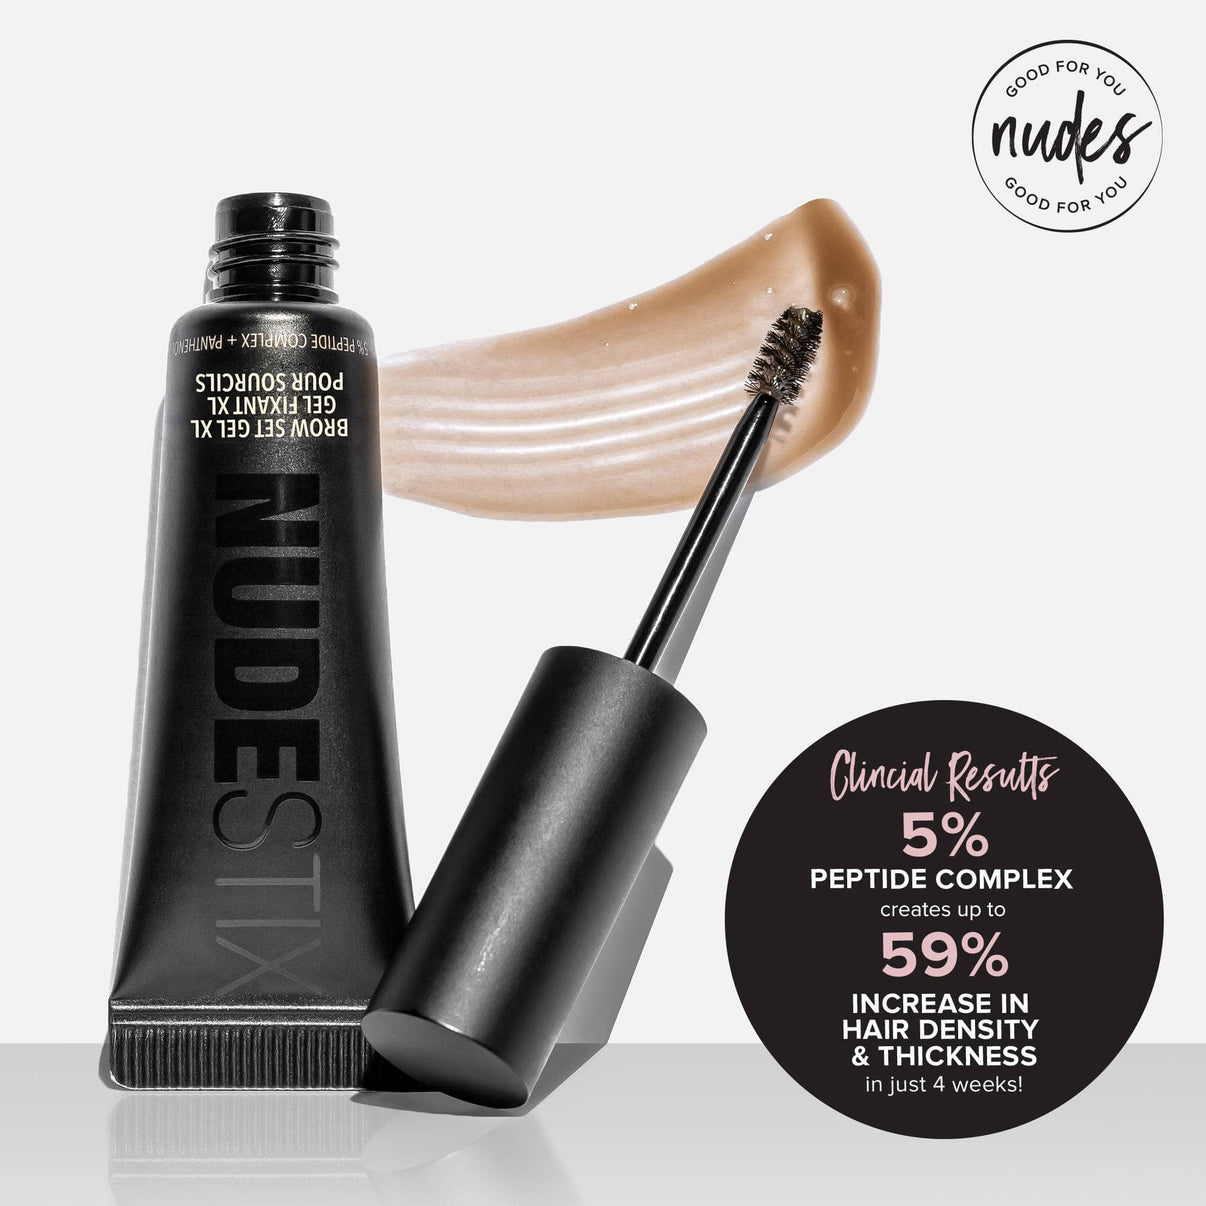 Nudestix Brow Gel with clinical results